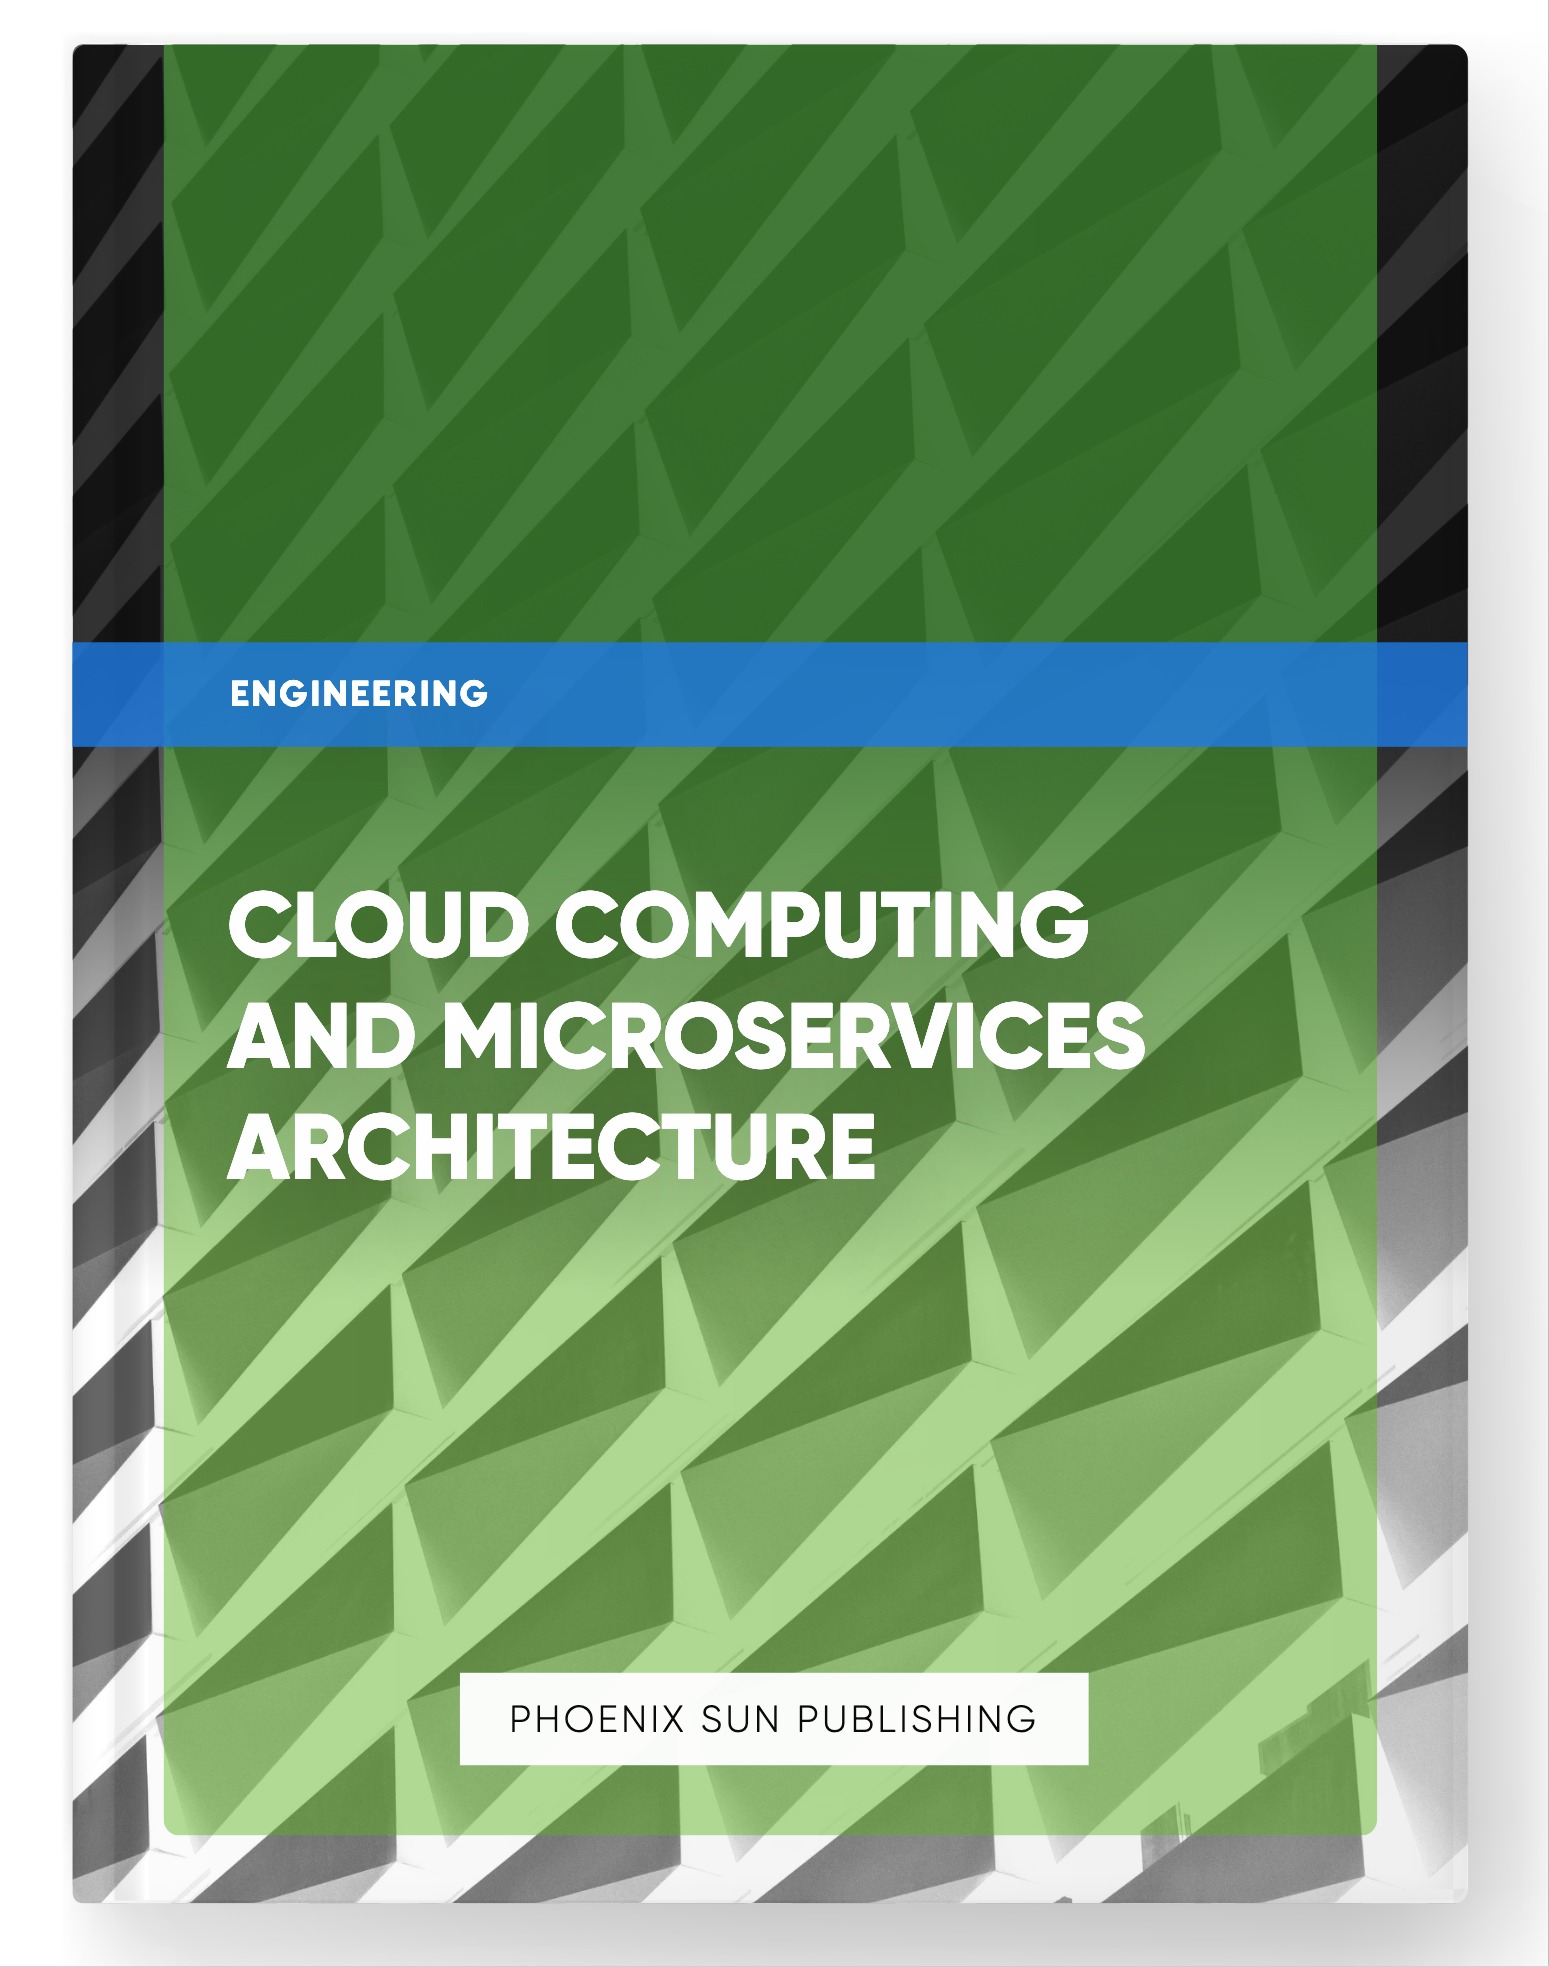 Cloud Computing and Microservices Architecture